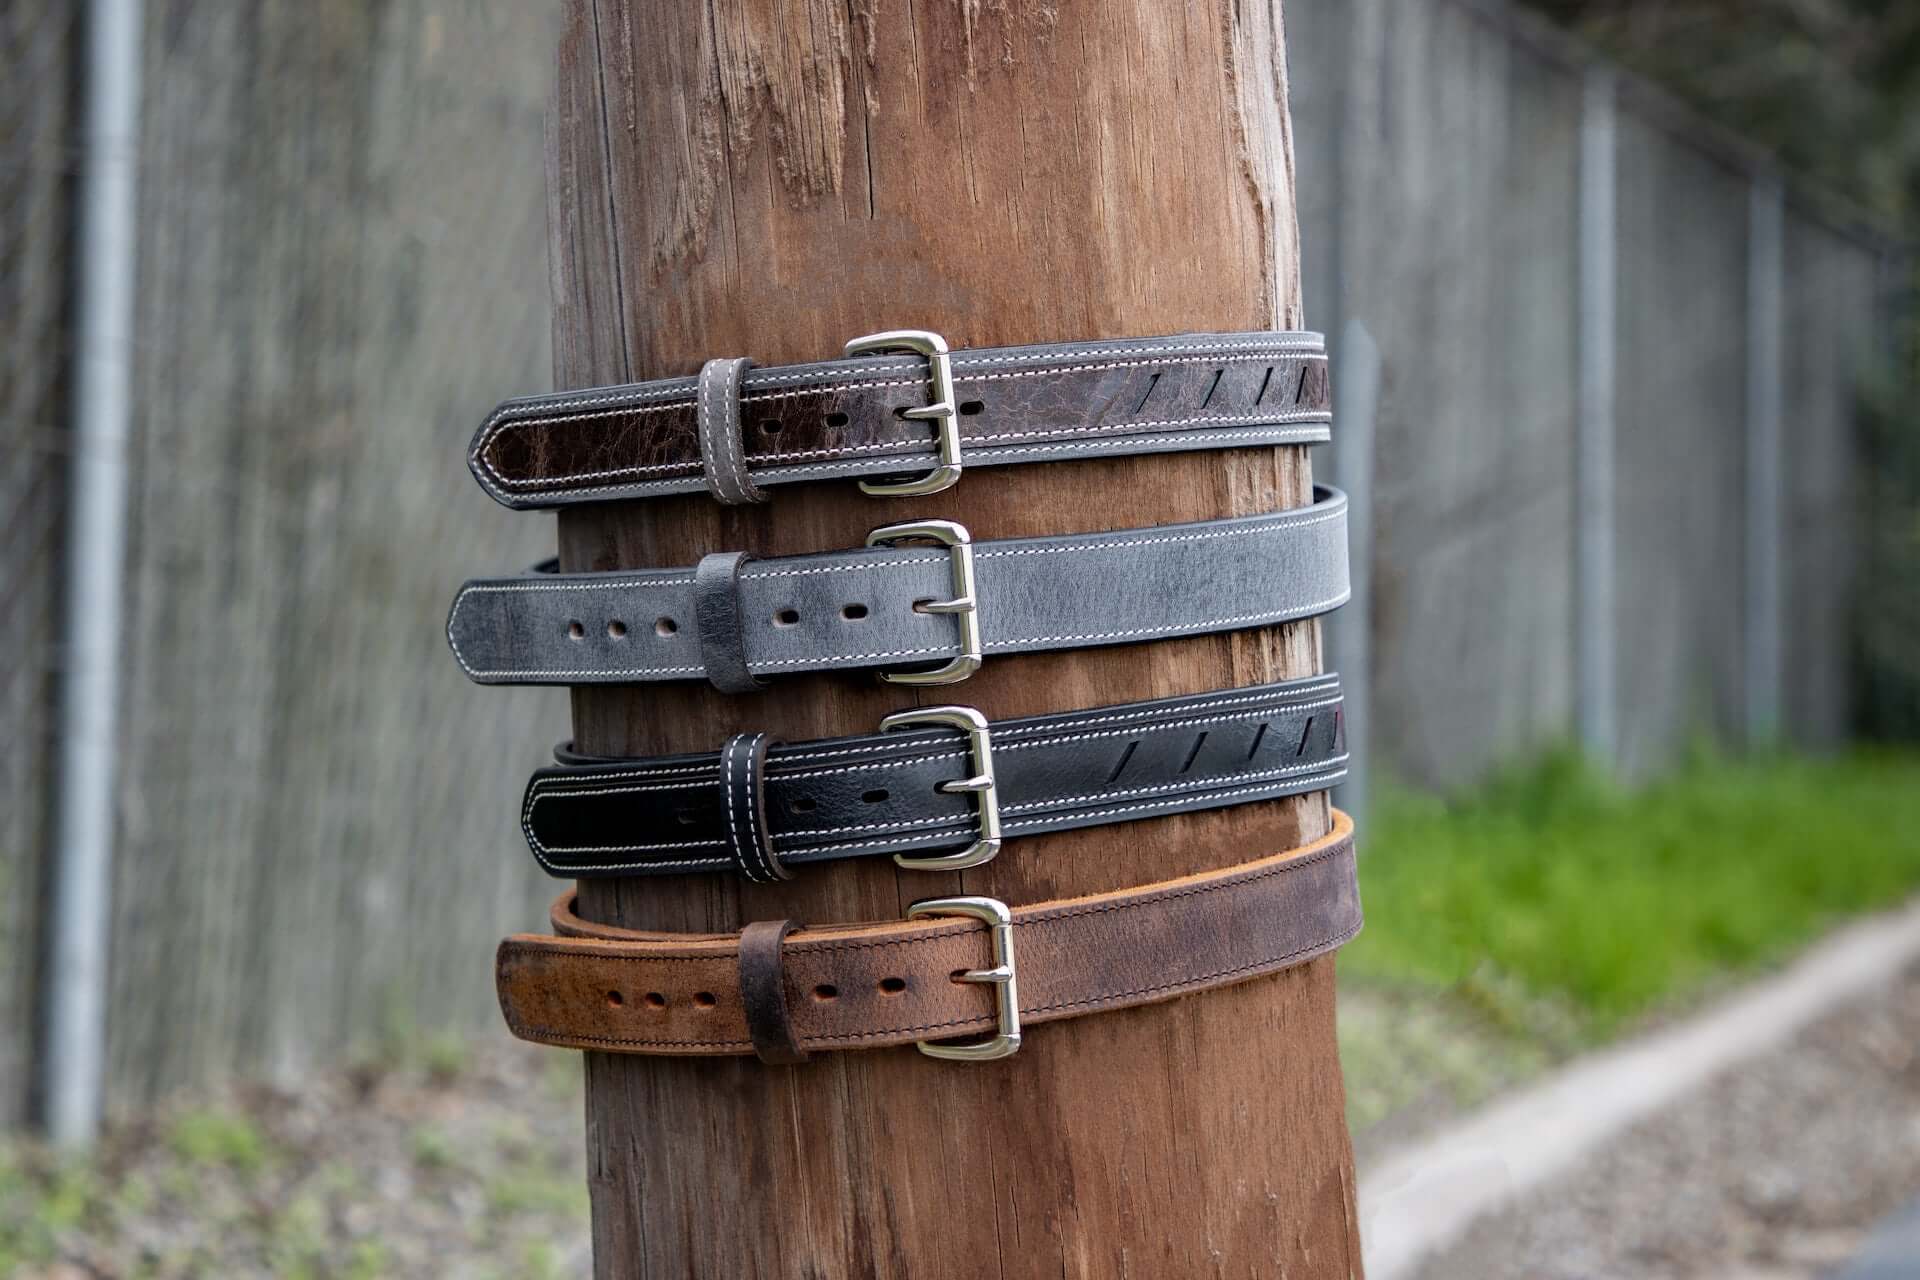 Four belts in various neutral colors fastened around a telephone pole.